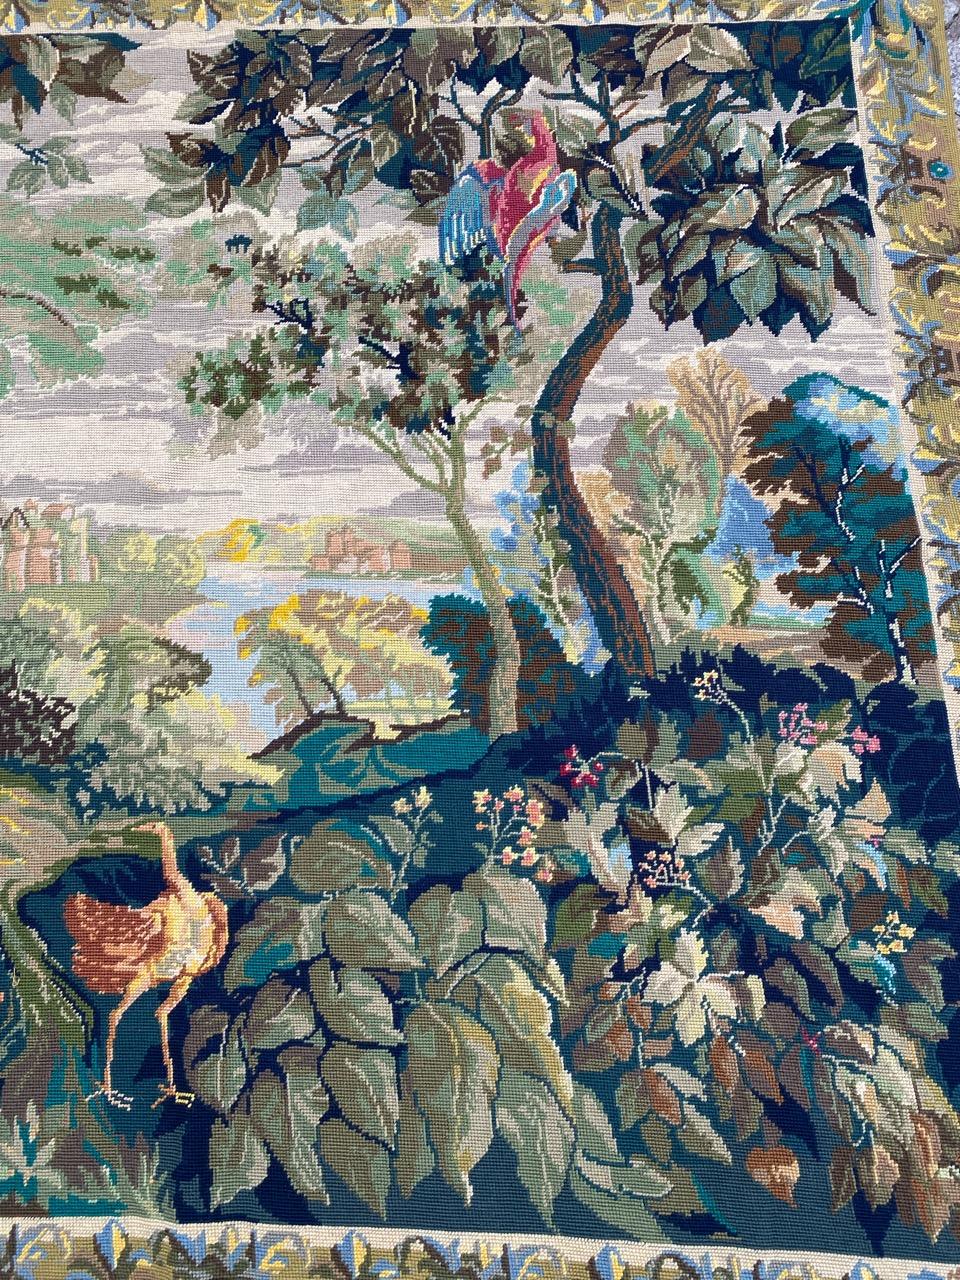 Exquisite French needlepoint tapestry featuring a stunning garden design with birds and vibrant colors. Hand-embroidered using the needlepoint method with high-quality wool. A beautiful piece of art to enhance any space.

✨✨✨
